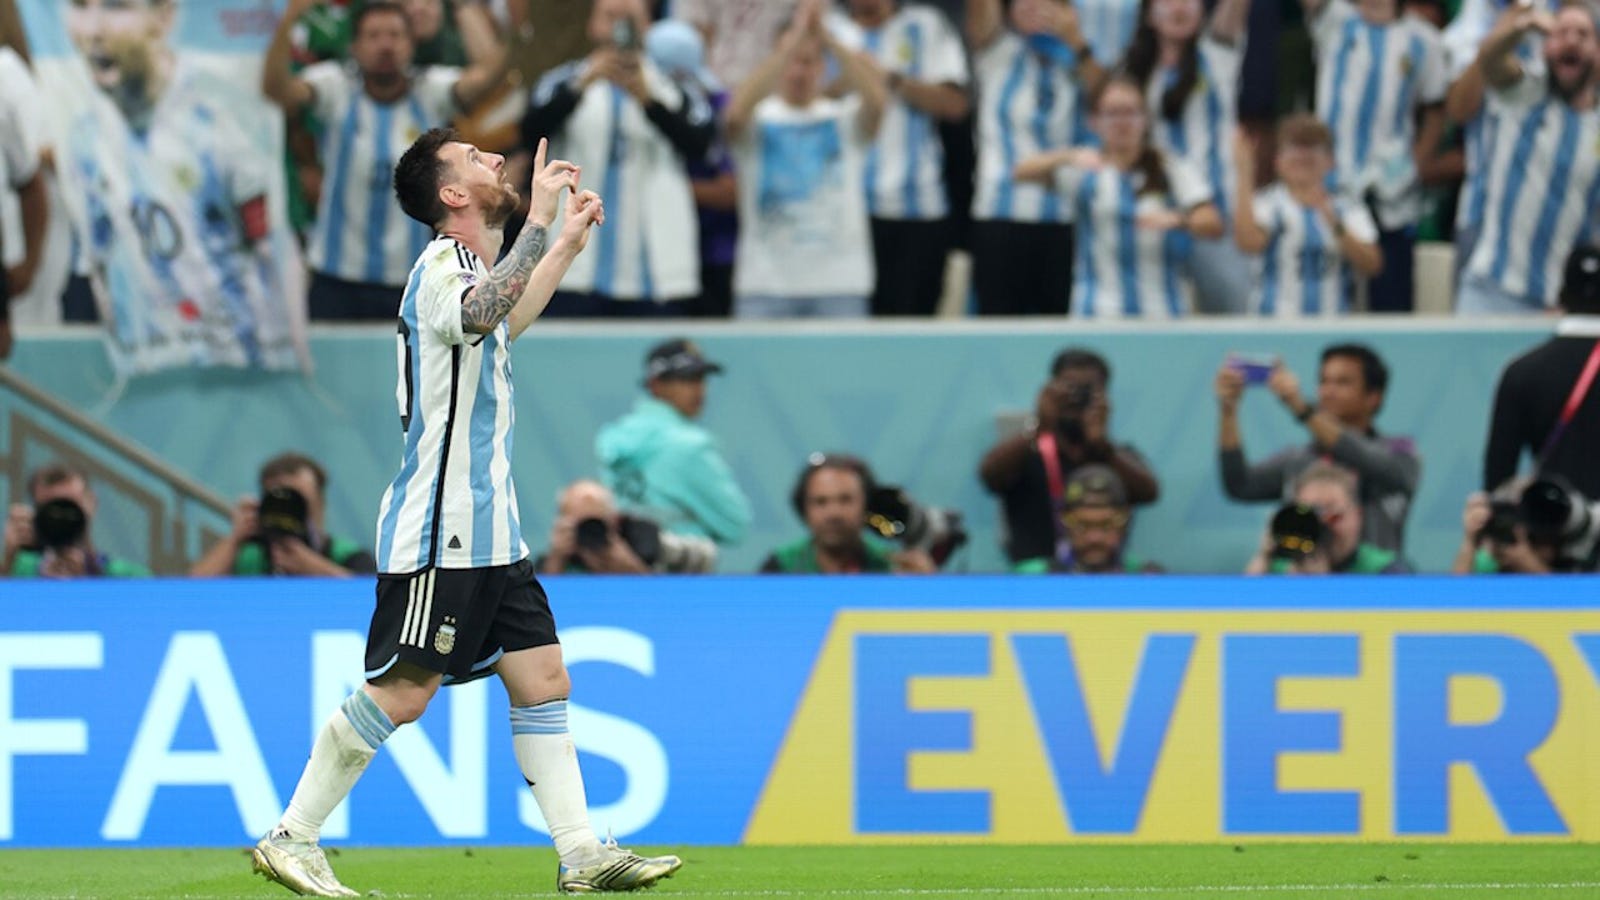 Argentina's Lionel Messi scored against Mexico in the 64th minute.